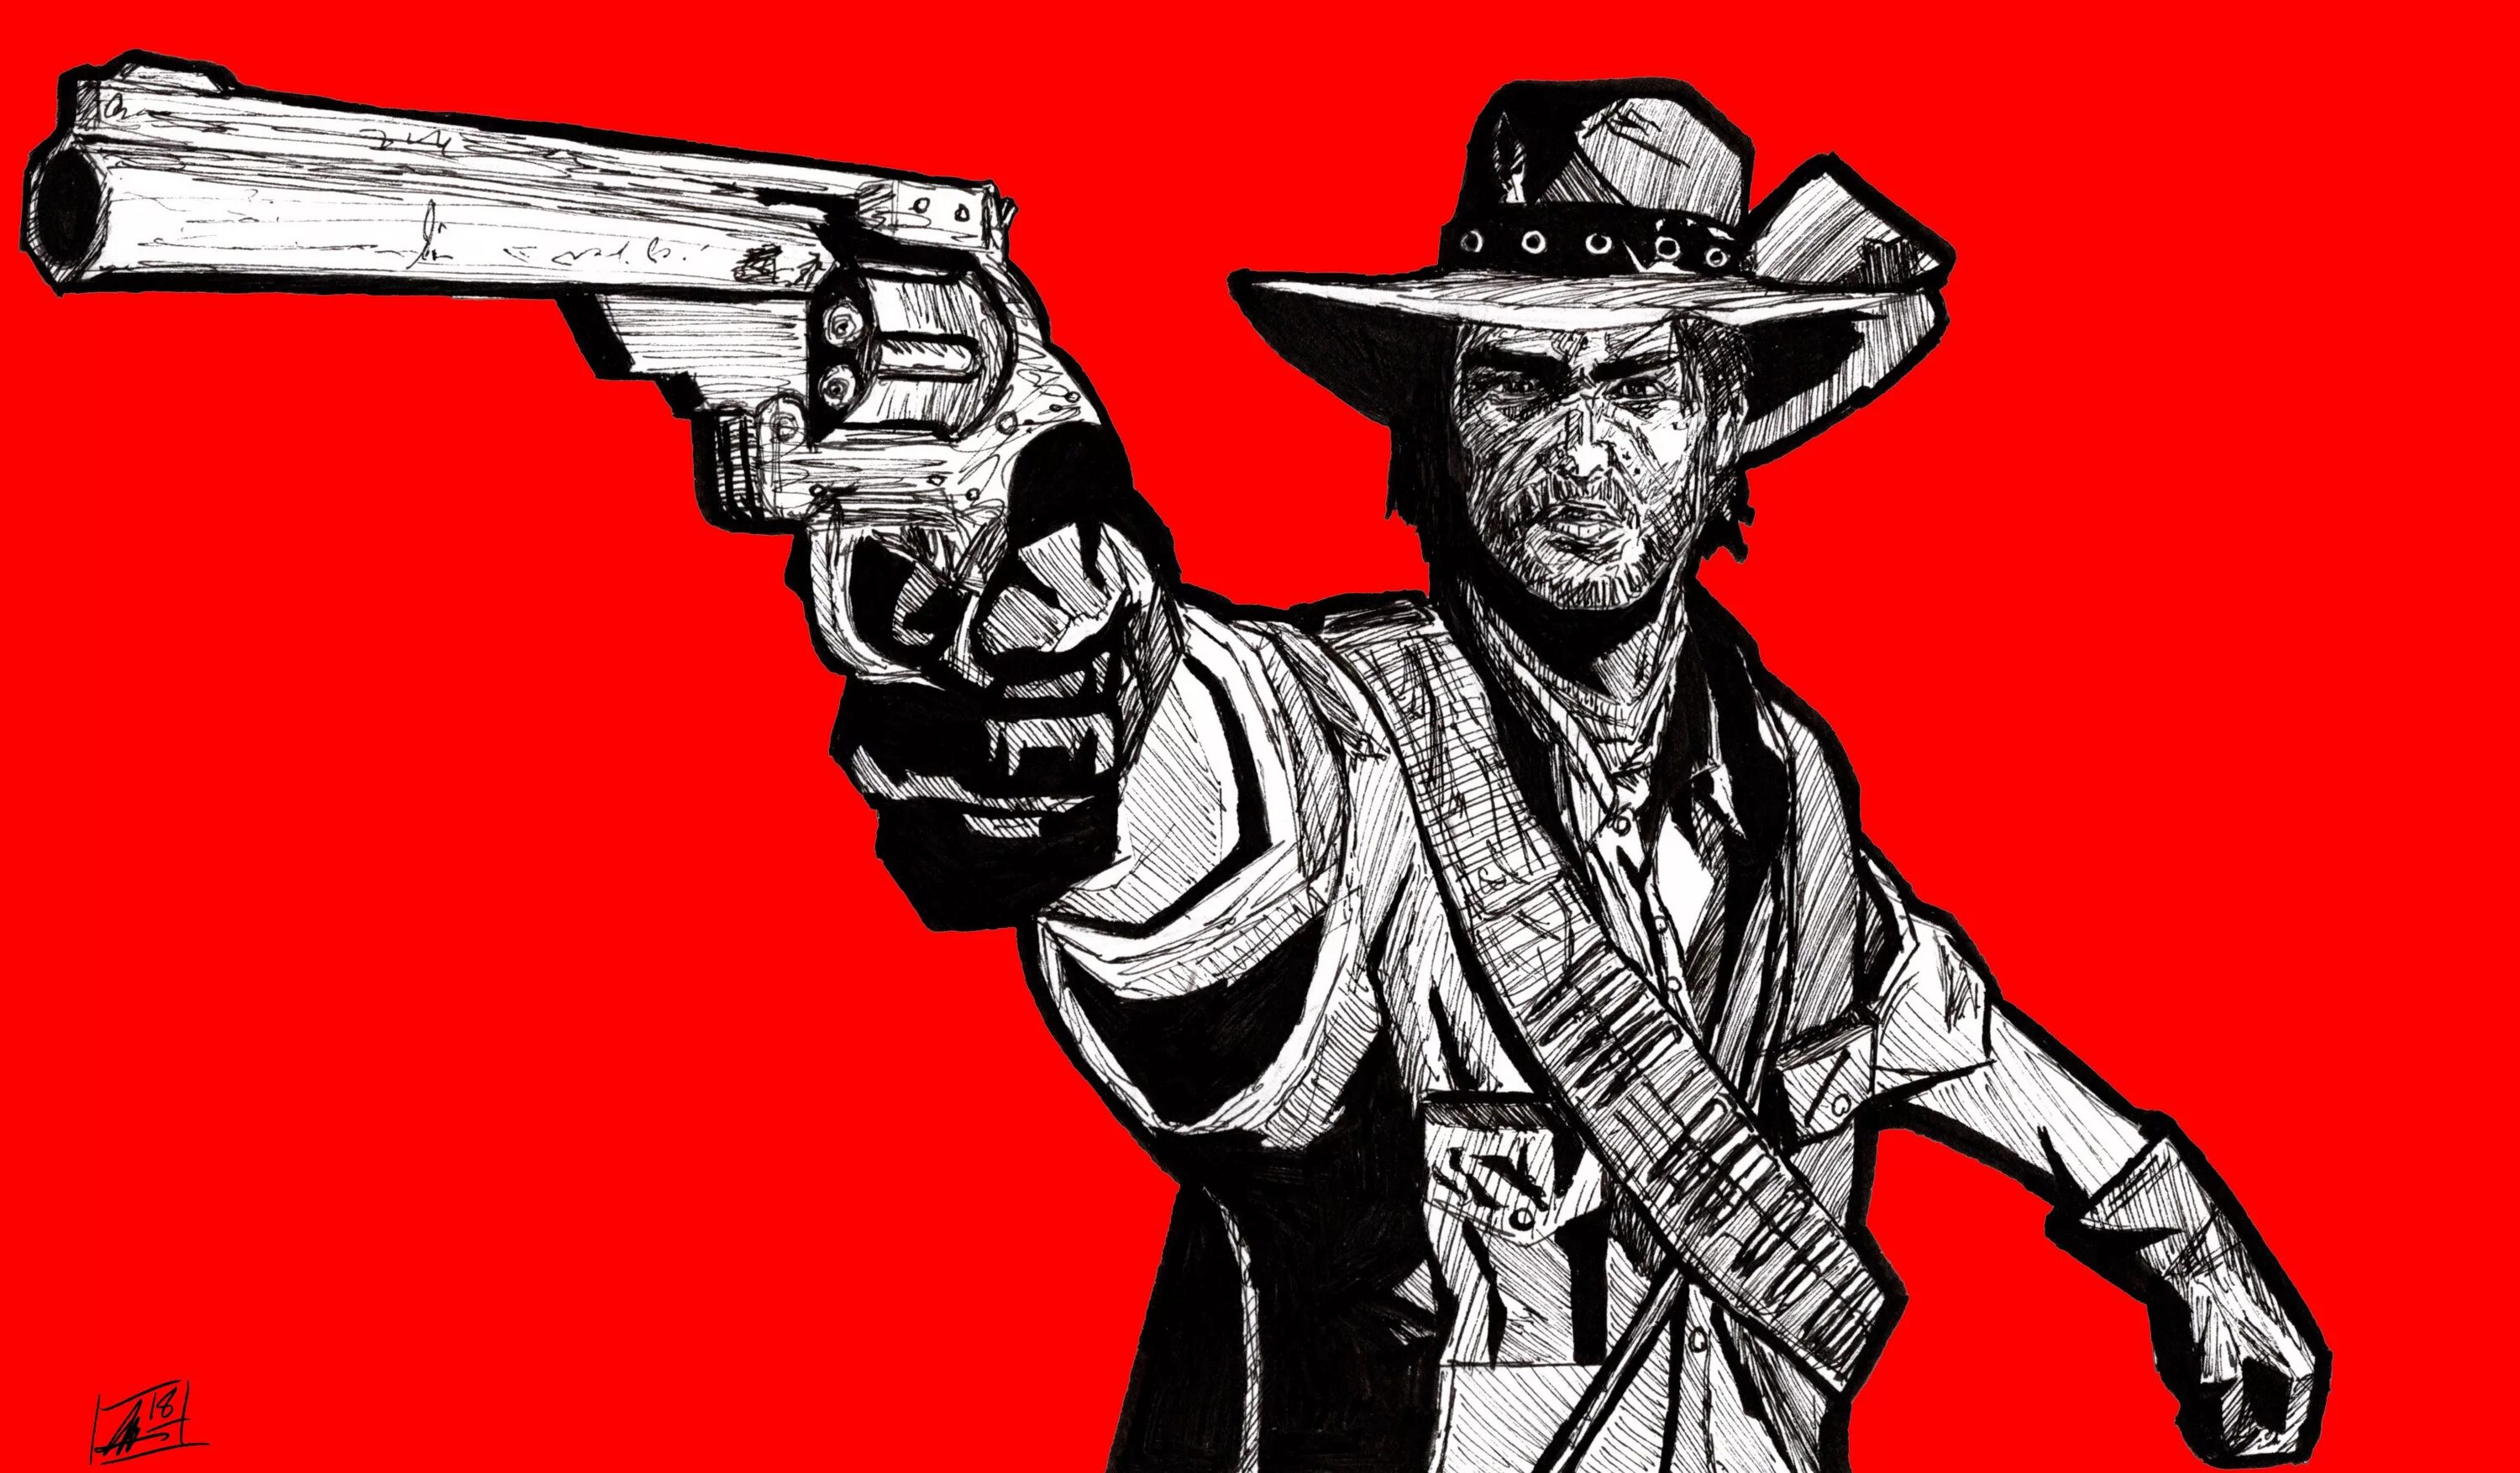 Red Dead Redemption 2 Art. Ред дед редемпшен 1. Ред дед редемпшен дед. Red Dead Redemption 2 Fan Art.